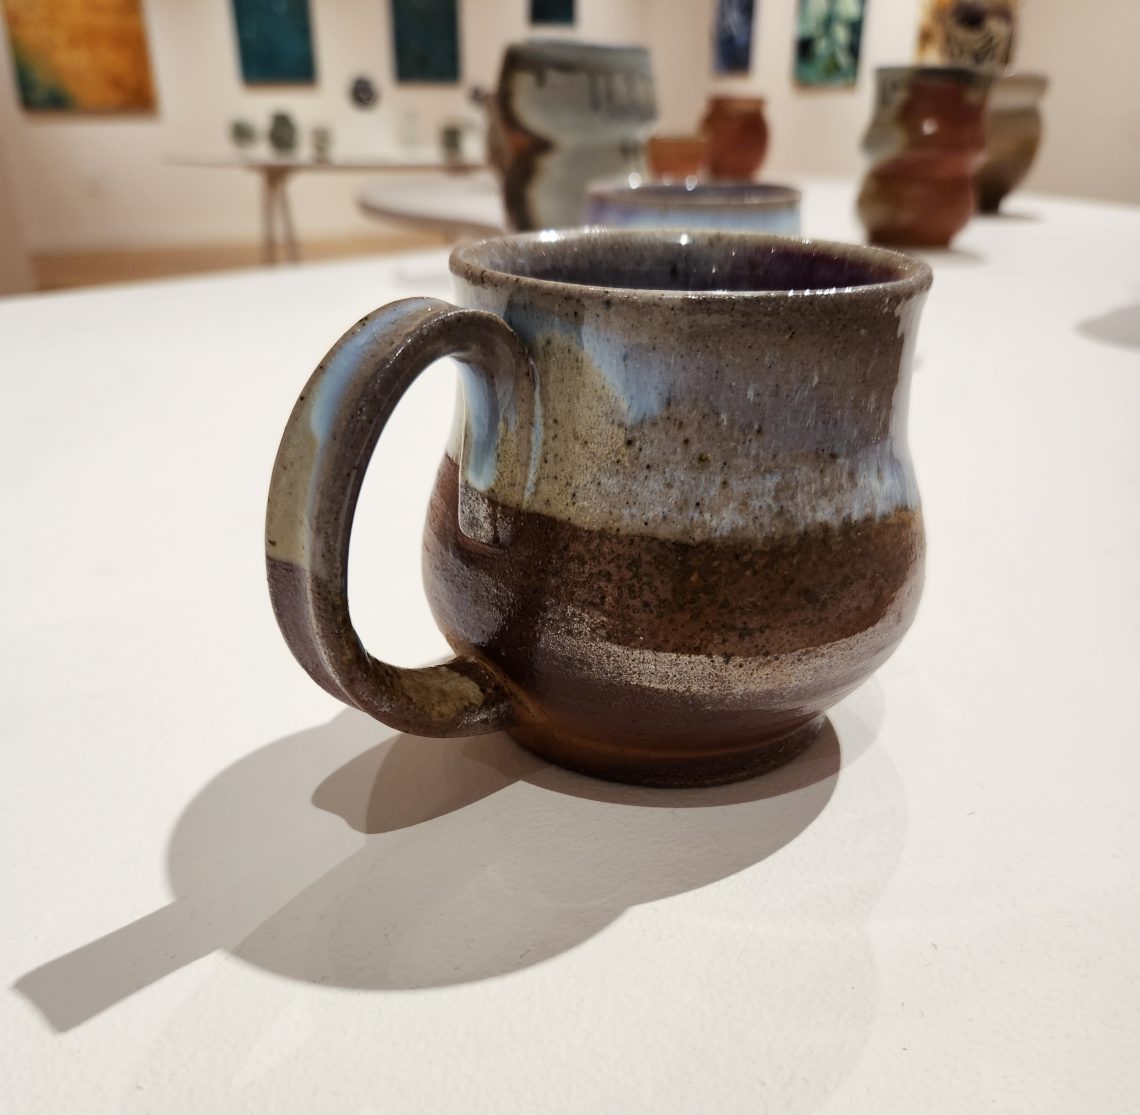 Annika Soderberg "Heaven's Gate Mug II" 2022. Stoneware, 5in. long x 4in. wide x 3in deep. Part of the "2023 Bachelor of Fine Arts and Bachelor of Arts Exhibition," University of Southern Maine Art Gallery.